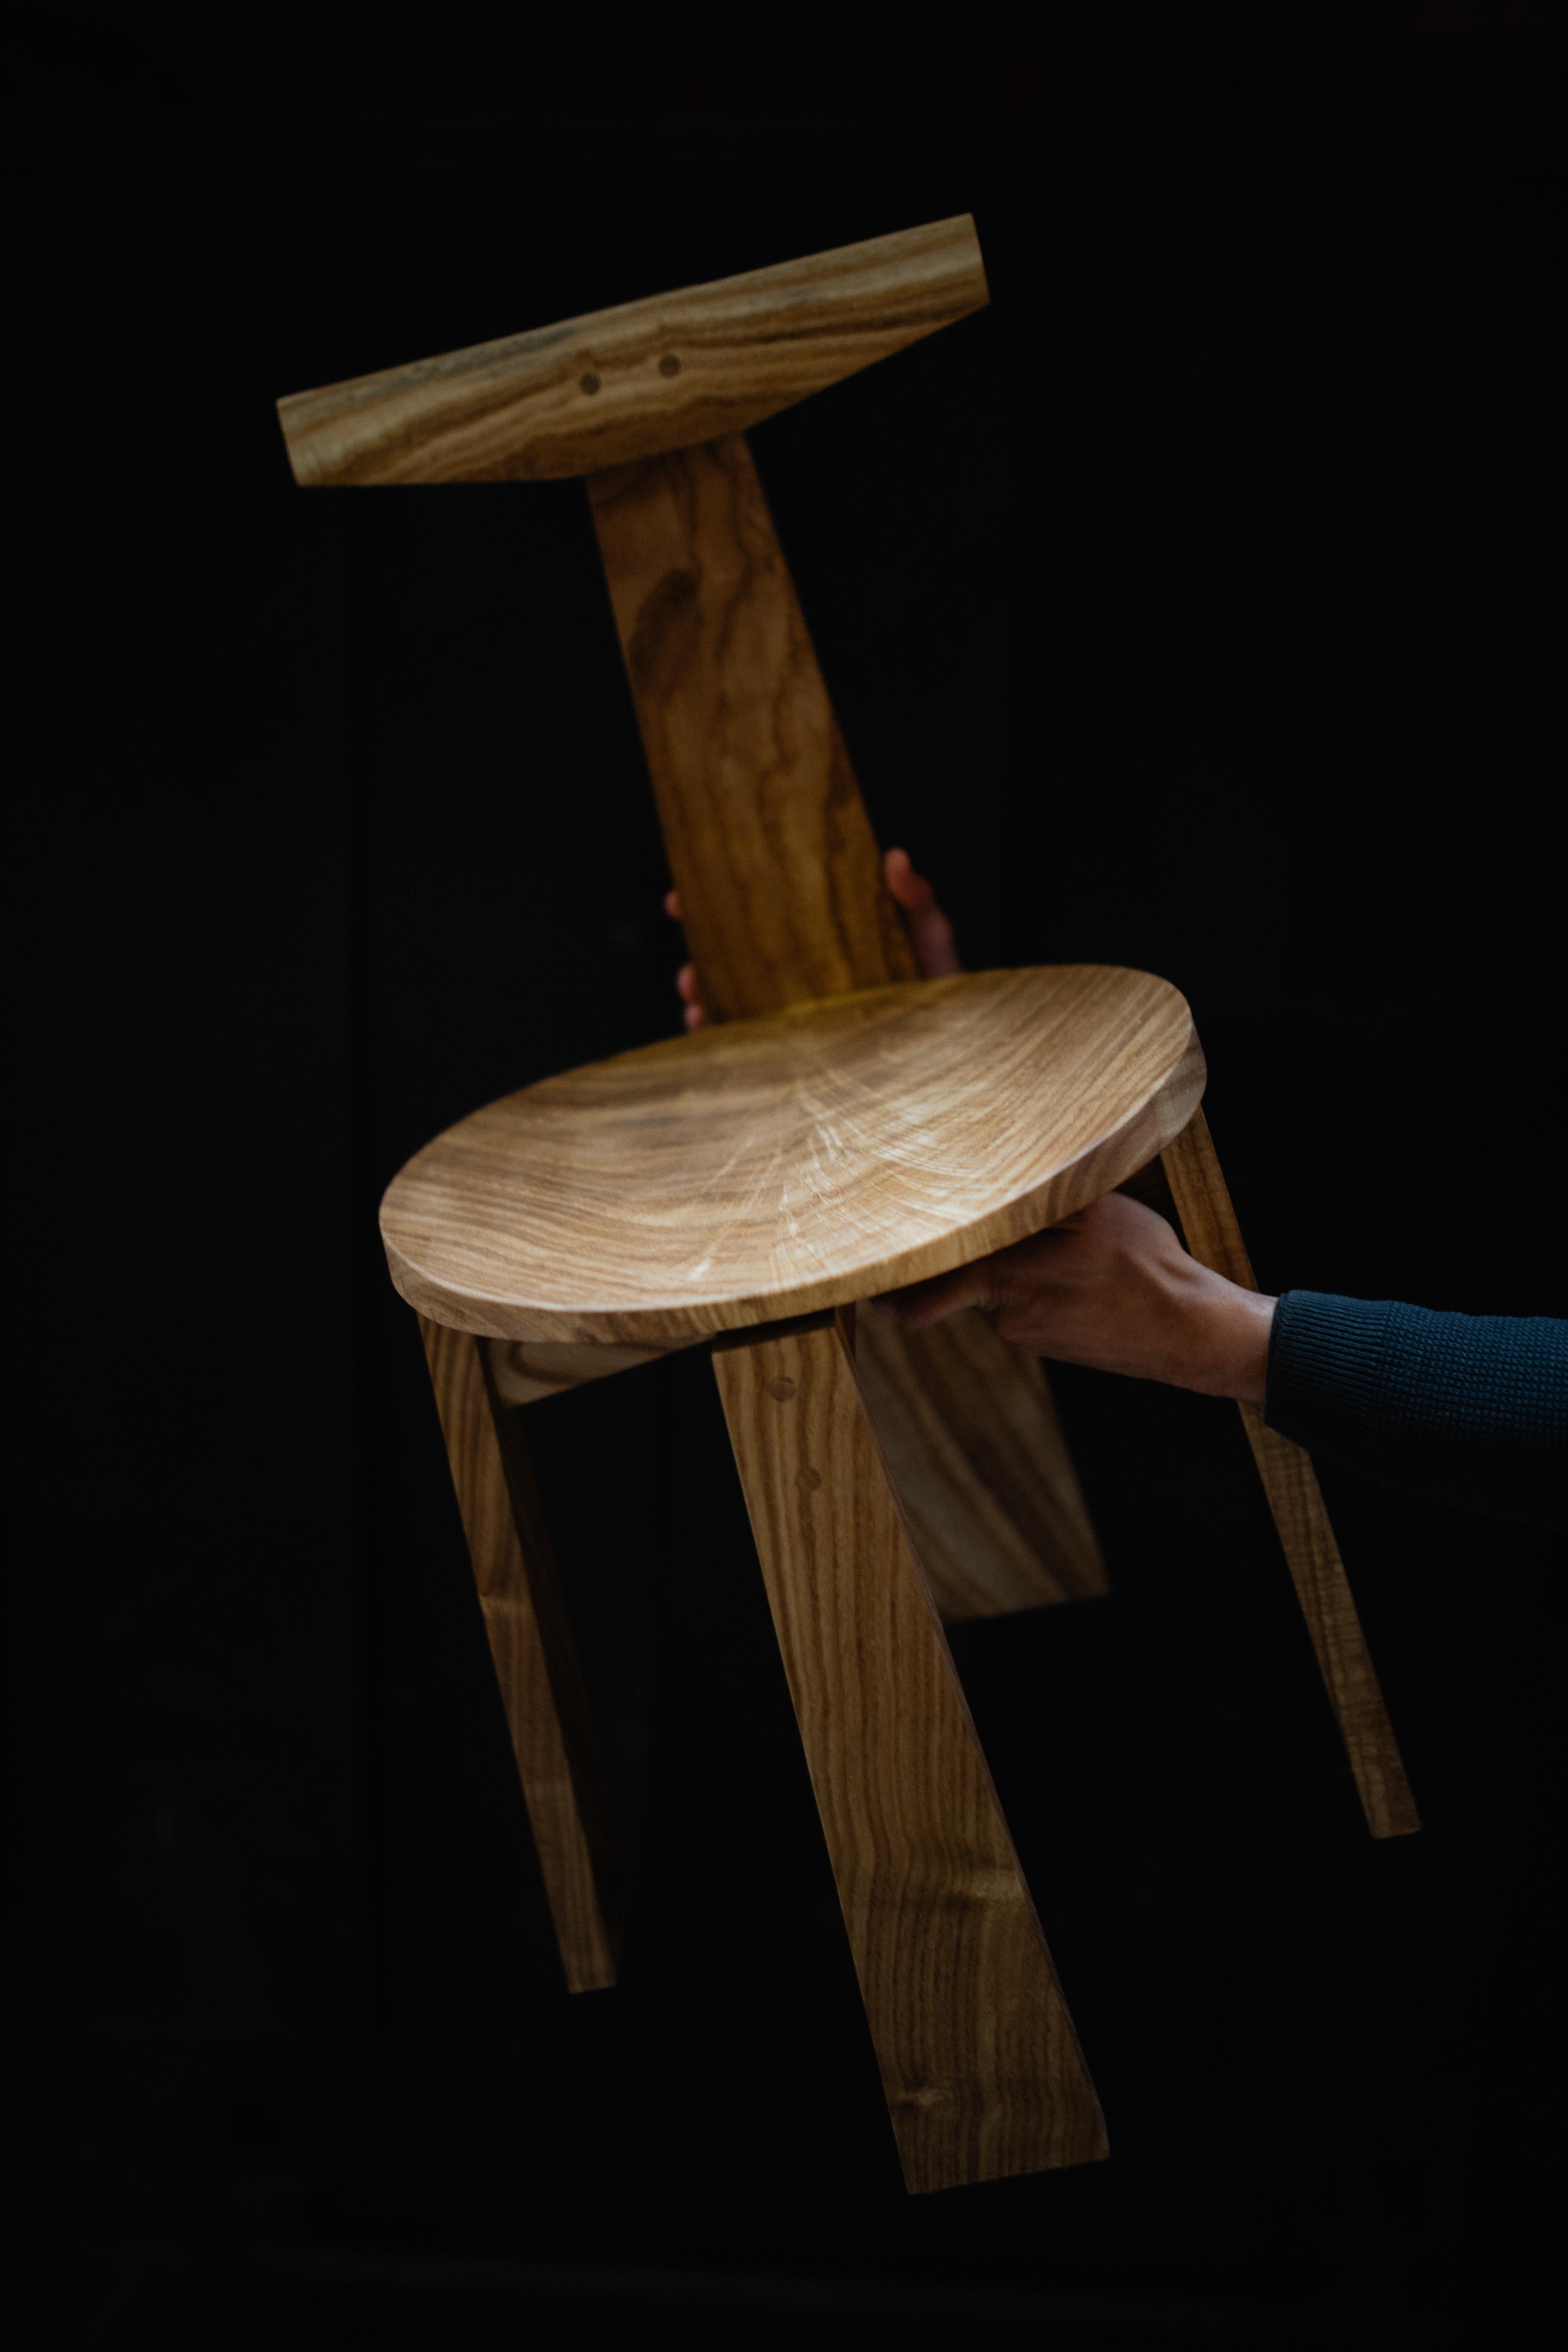 The Urithi Dining Chair is an original design, handmade with hardwood to be a functional art piece. The Chair was designed from the back, as this is the part you see mostly during the day. Inspired by nature, the back of the chair with its engraving